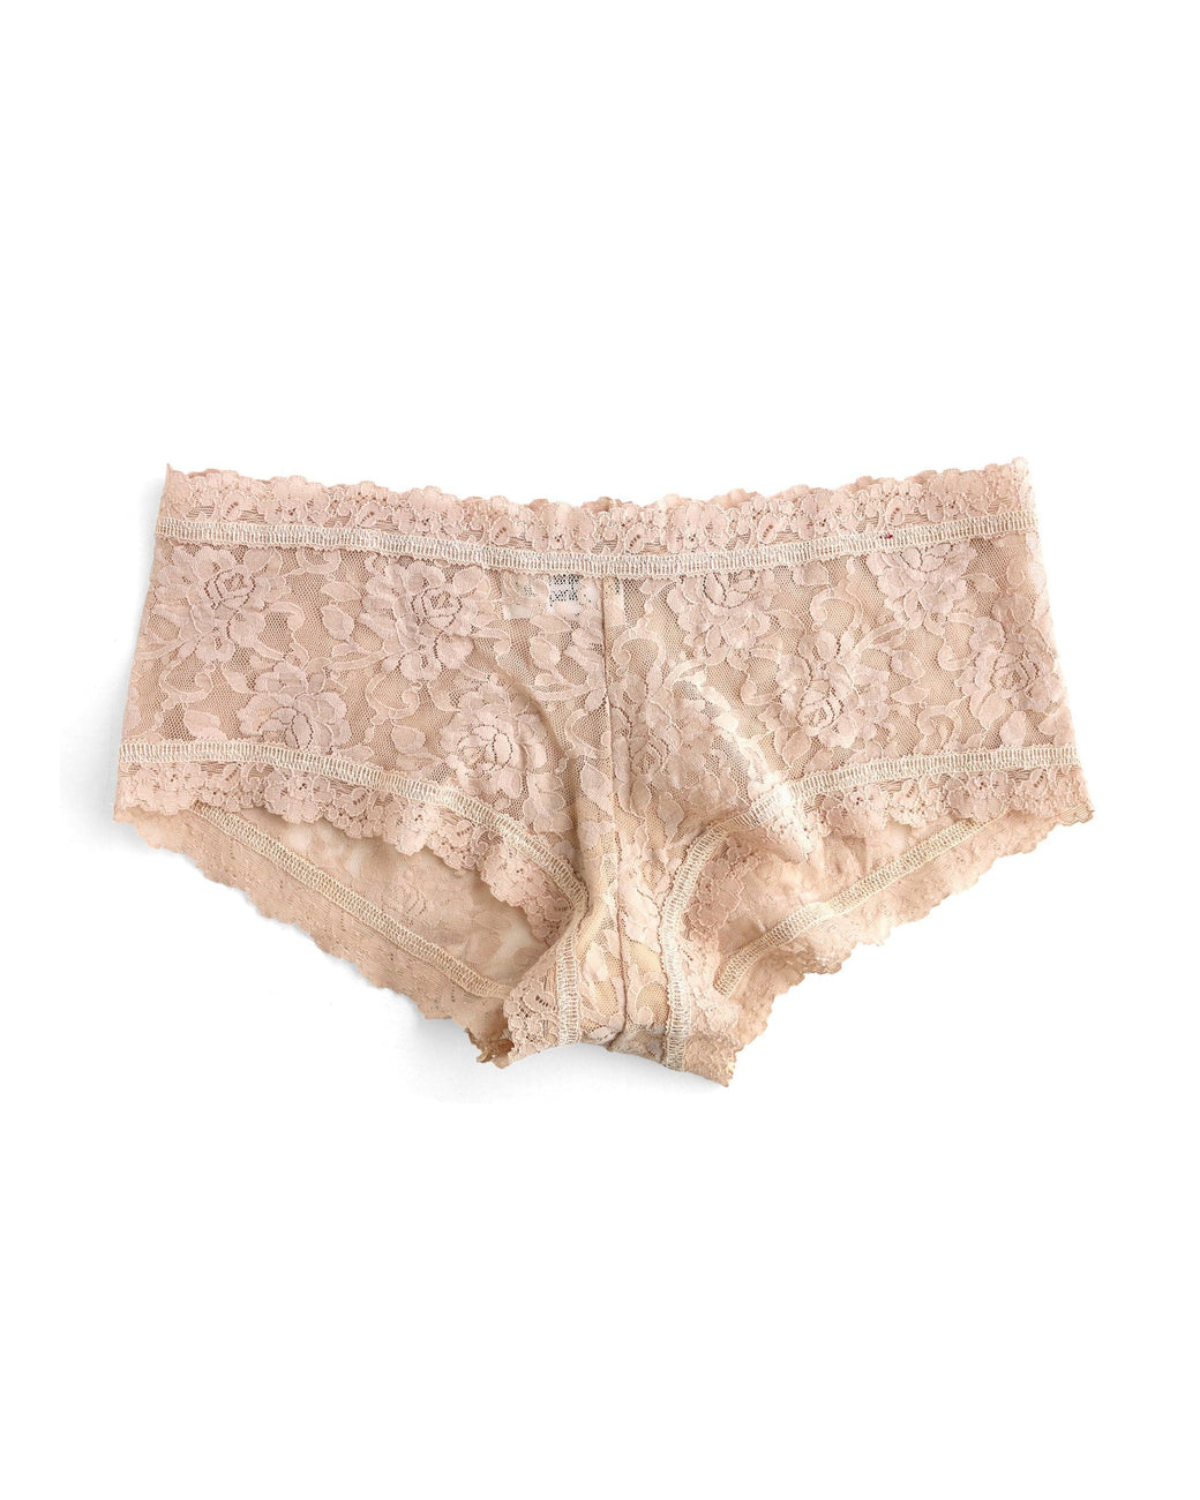 Flay lay of a lace boyshort panty in beige